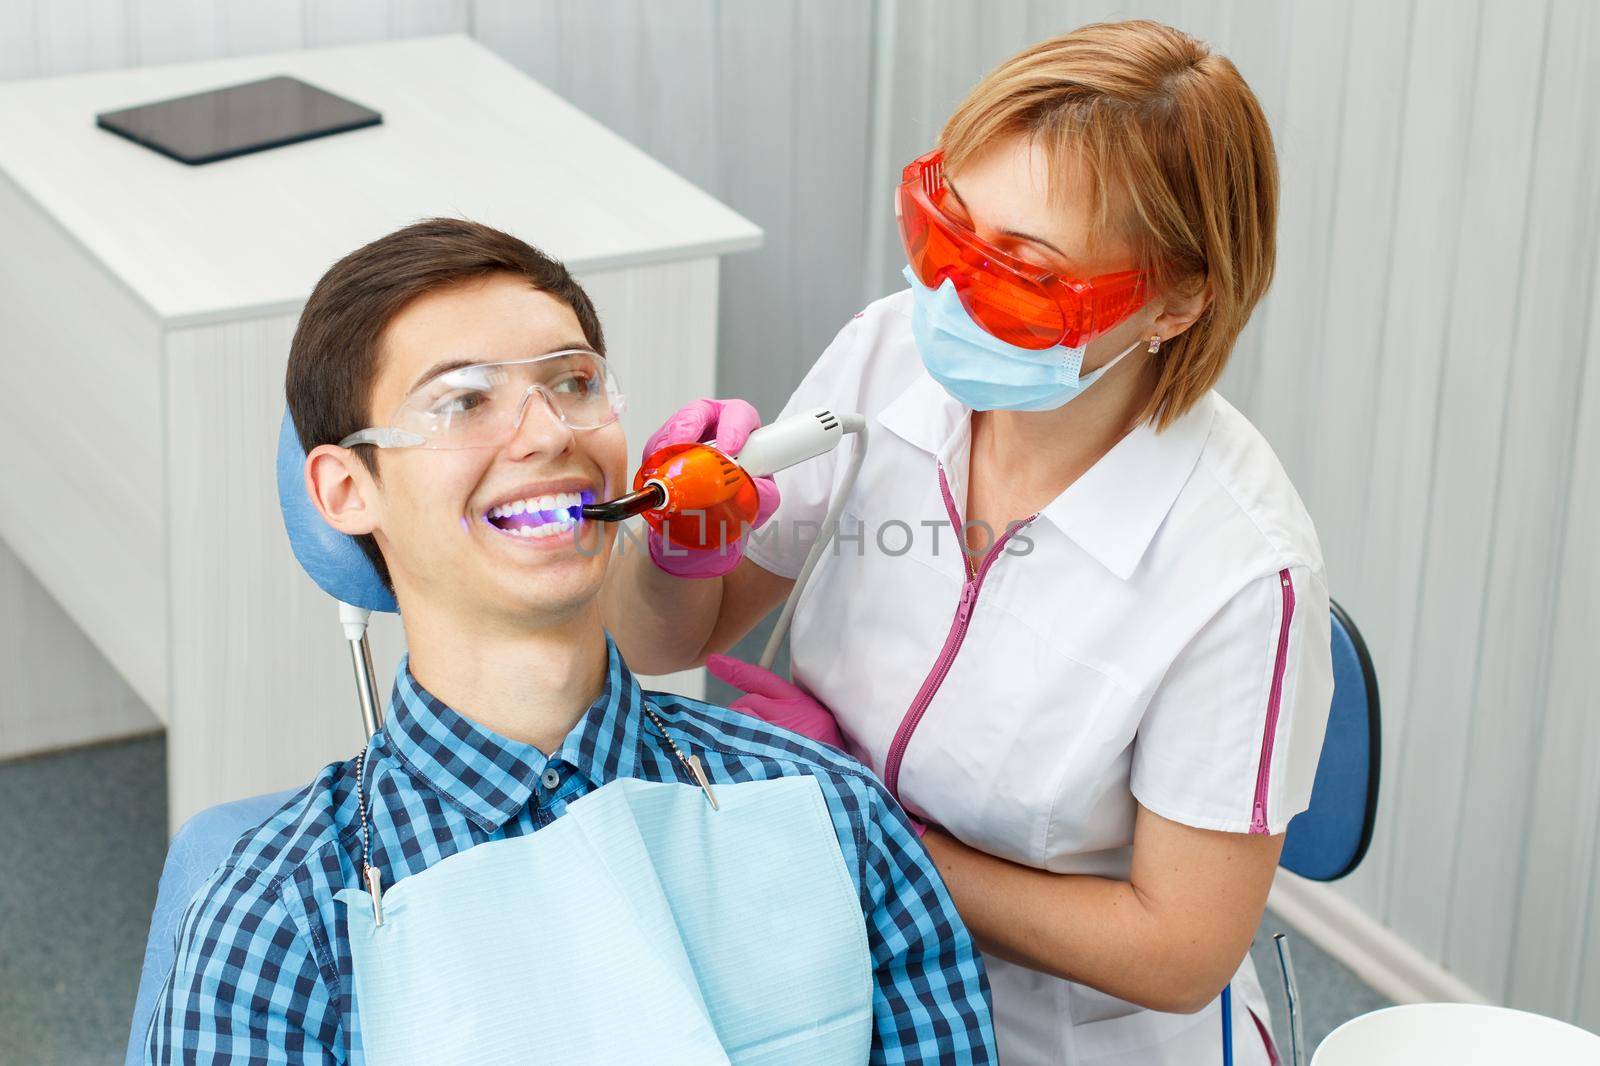 Beautiful woman dentist treating a patient teeth in dental office. Doctor wearing glasses, mask, white uniform and pink gloves. Dentistry